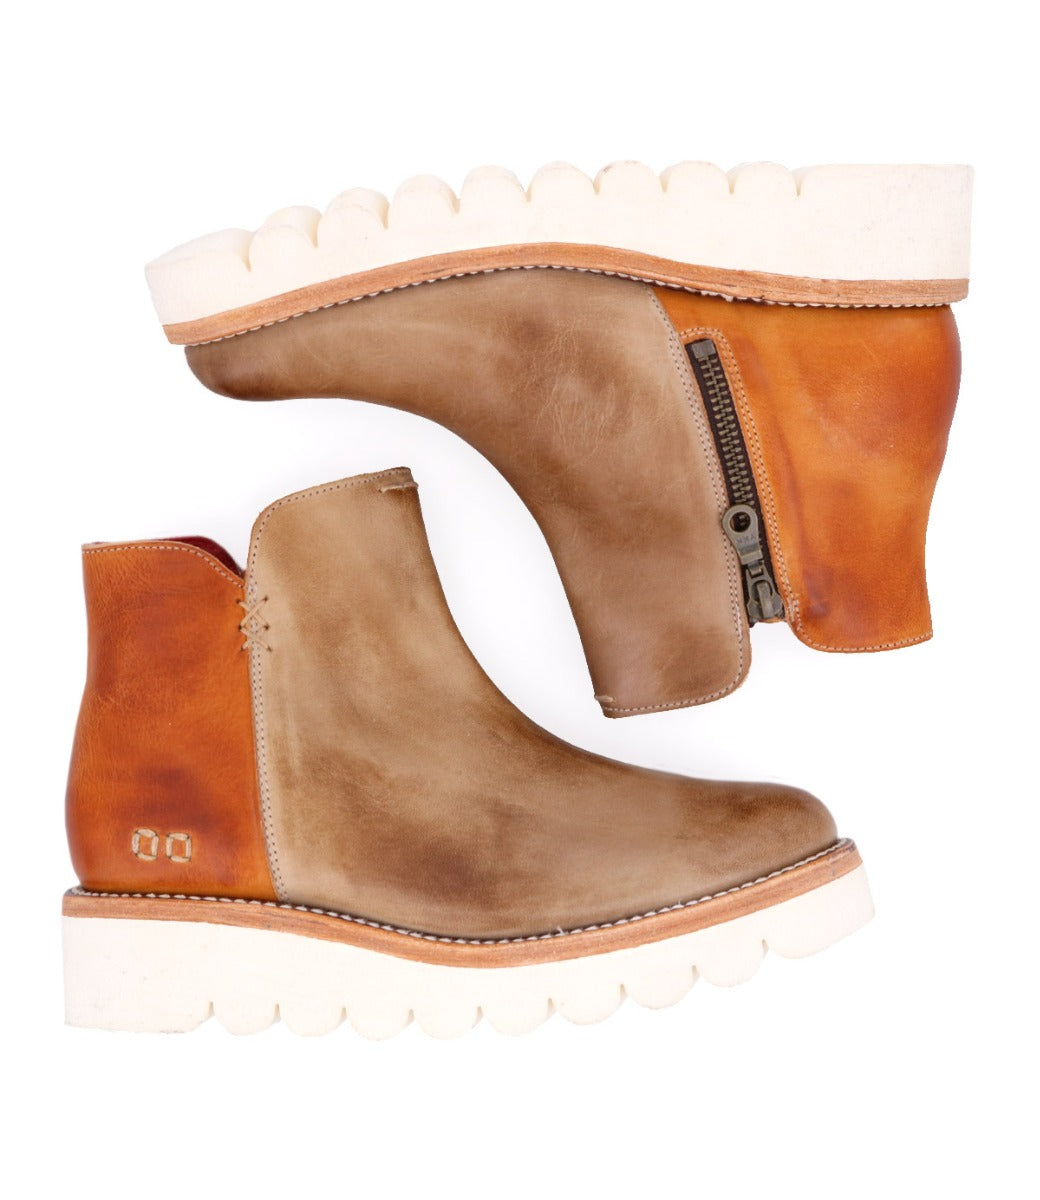 A pair of Lydyi by Bed Stu leather ankle boots.